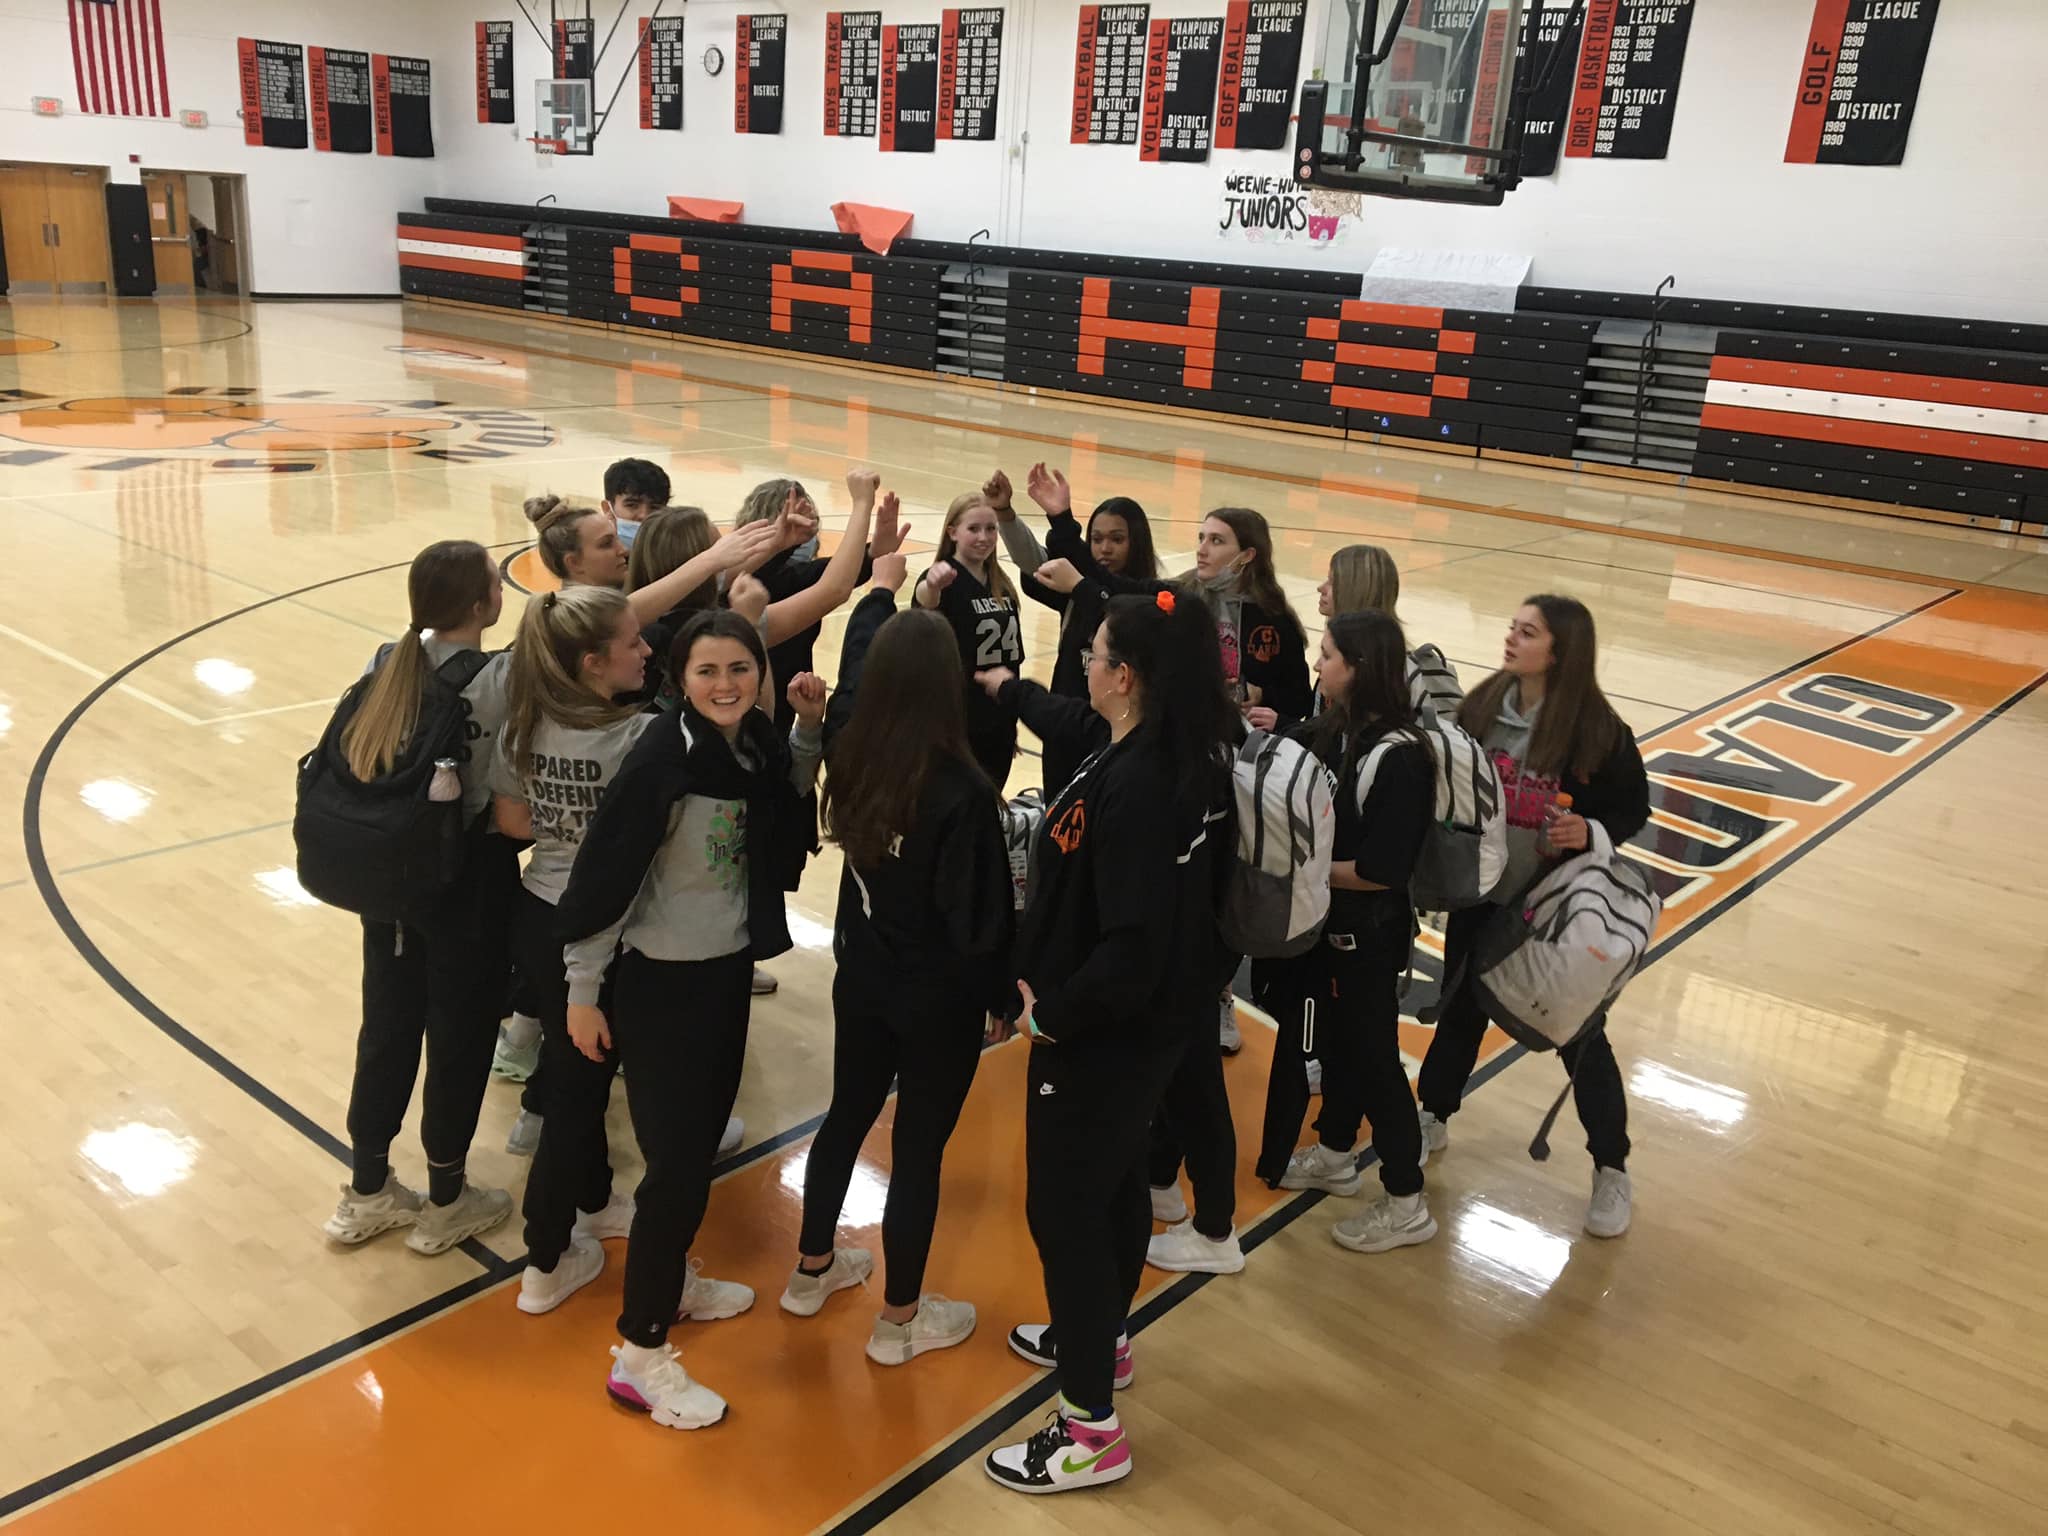 Bobcats Volleyball Team Receives Royal Send-Off To PIAA State Championship Match Clarion Sports Zone